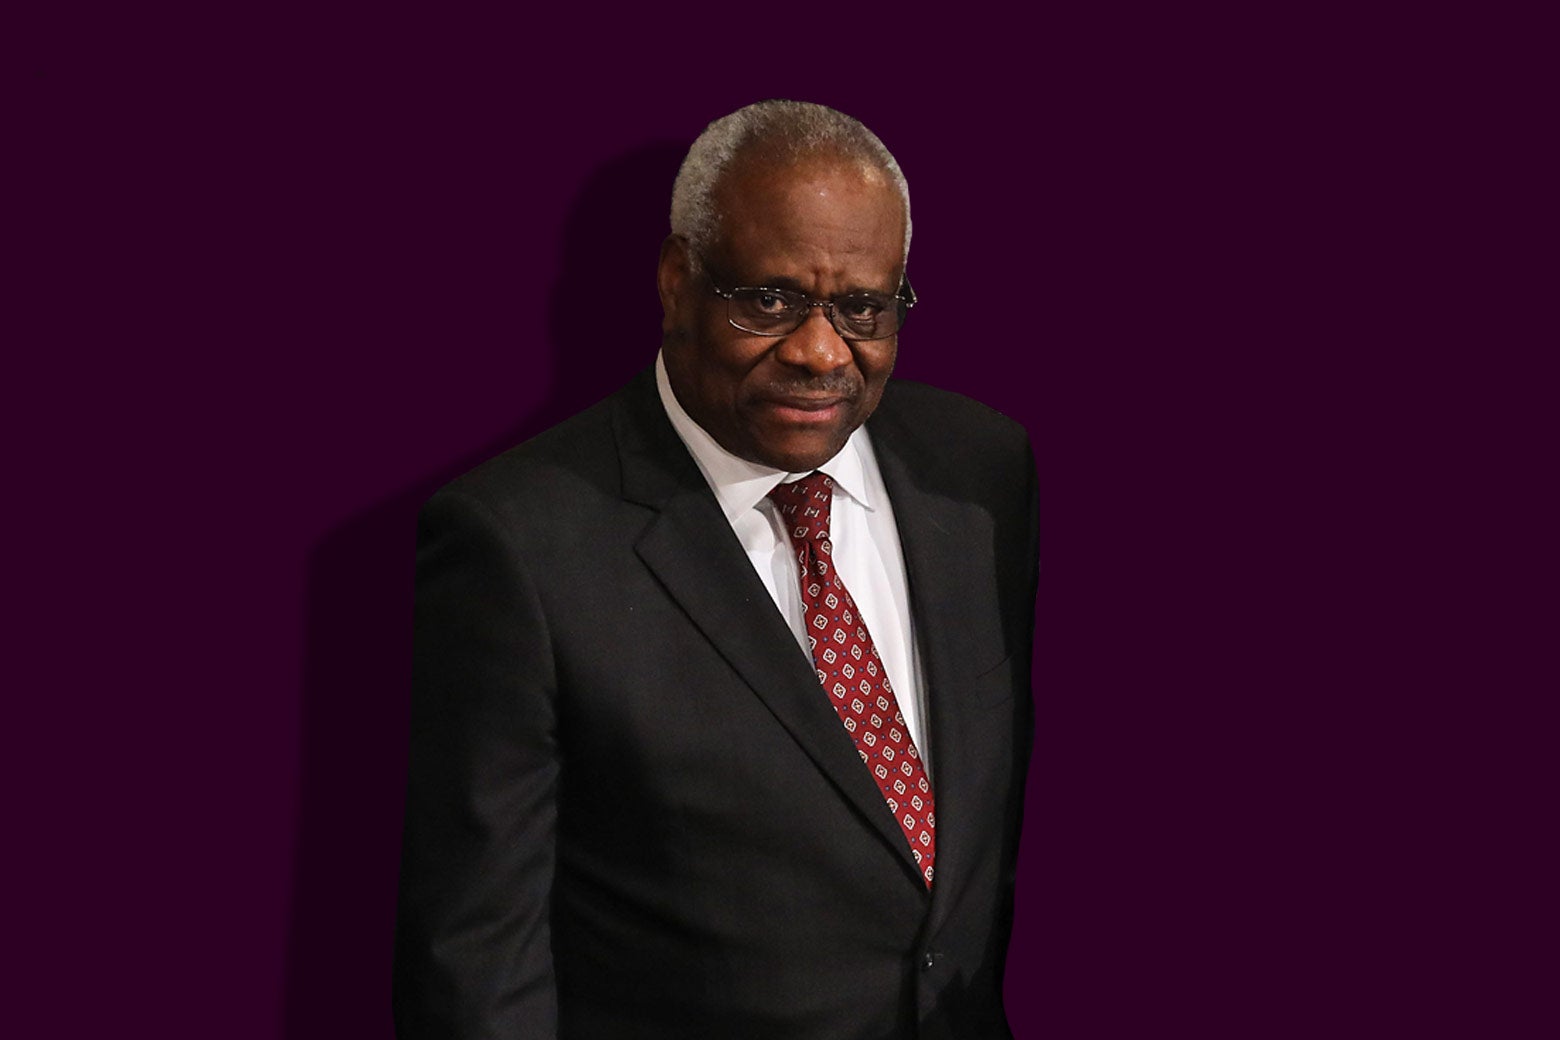 Photo illustration of Supreme Court Justice Clarence Thomas against a purple background.